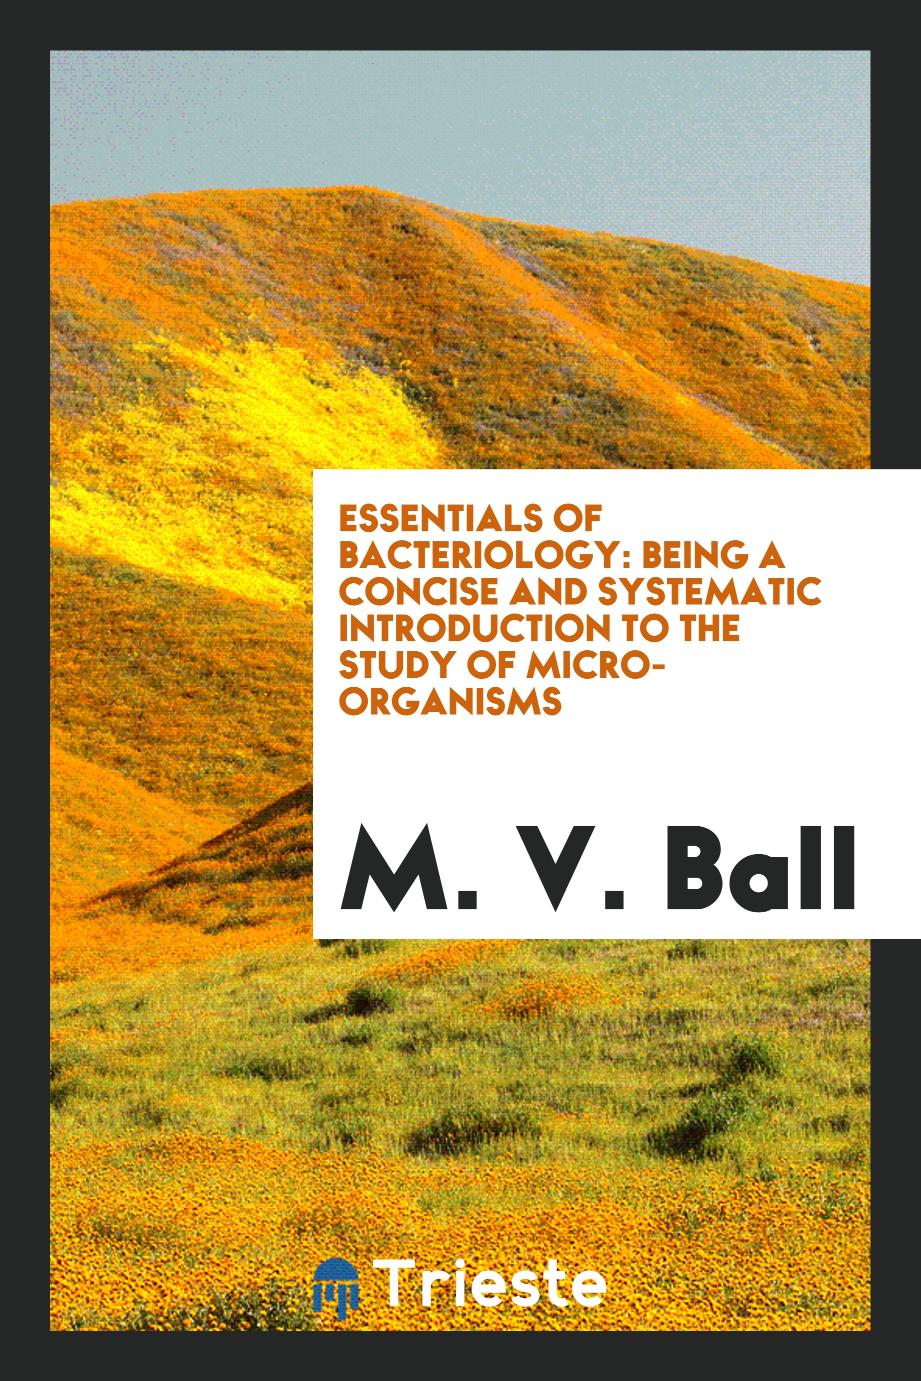 Essentials of Bacteriology: Being a Concise and Systematic Introduction to the Study of Micro-Organisms